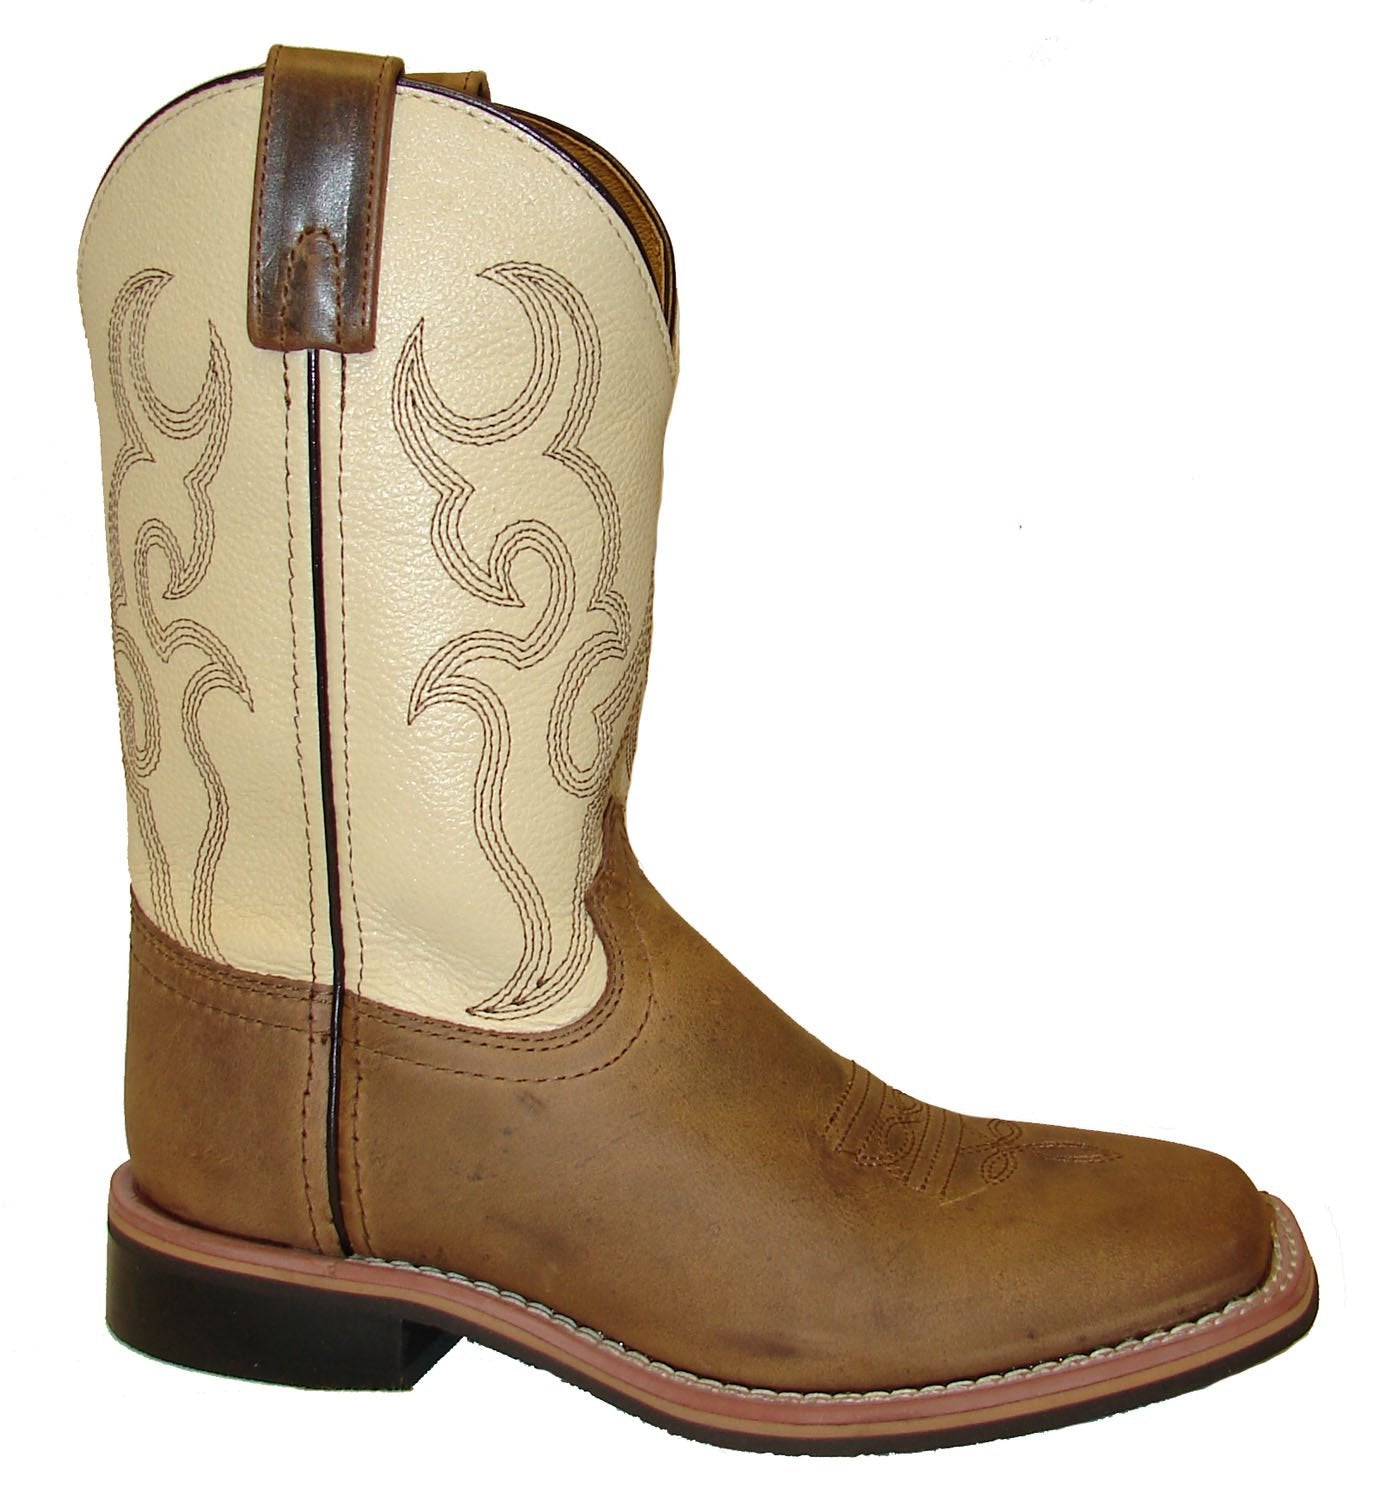 Smoky Mountain Youth Scout Brown/Cream Cowboy Boot